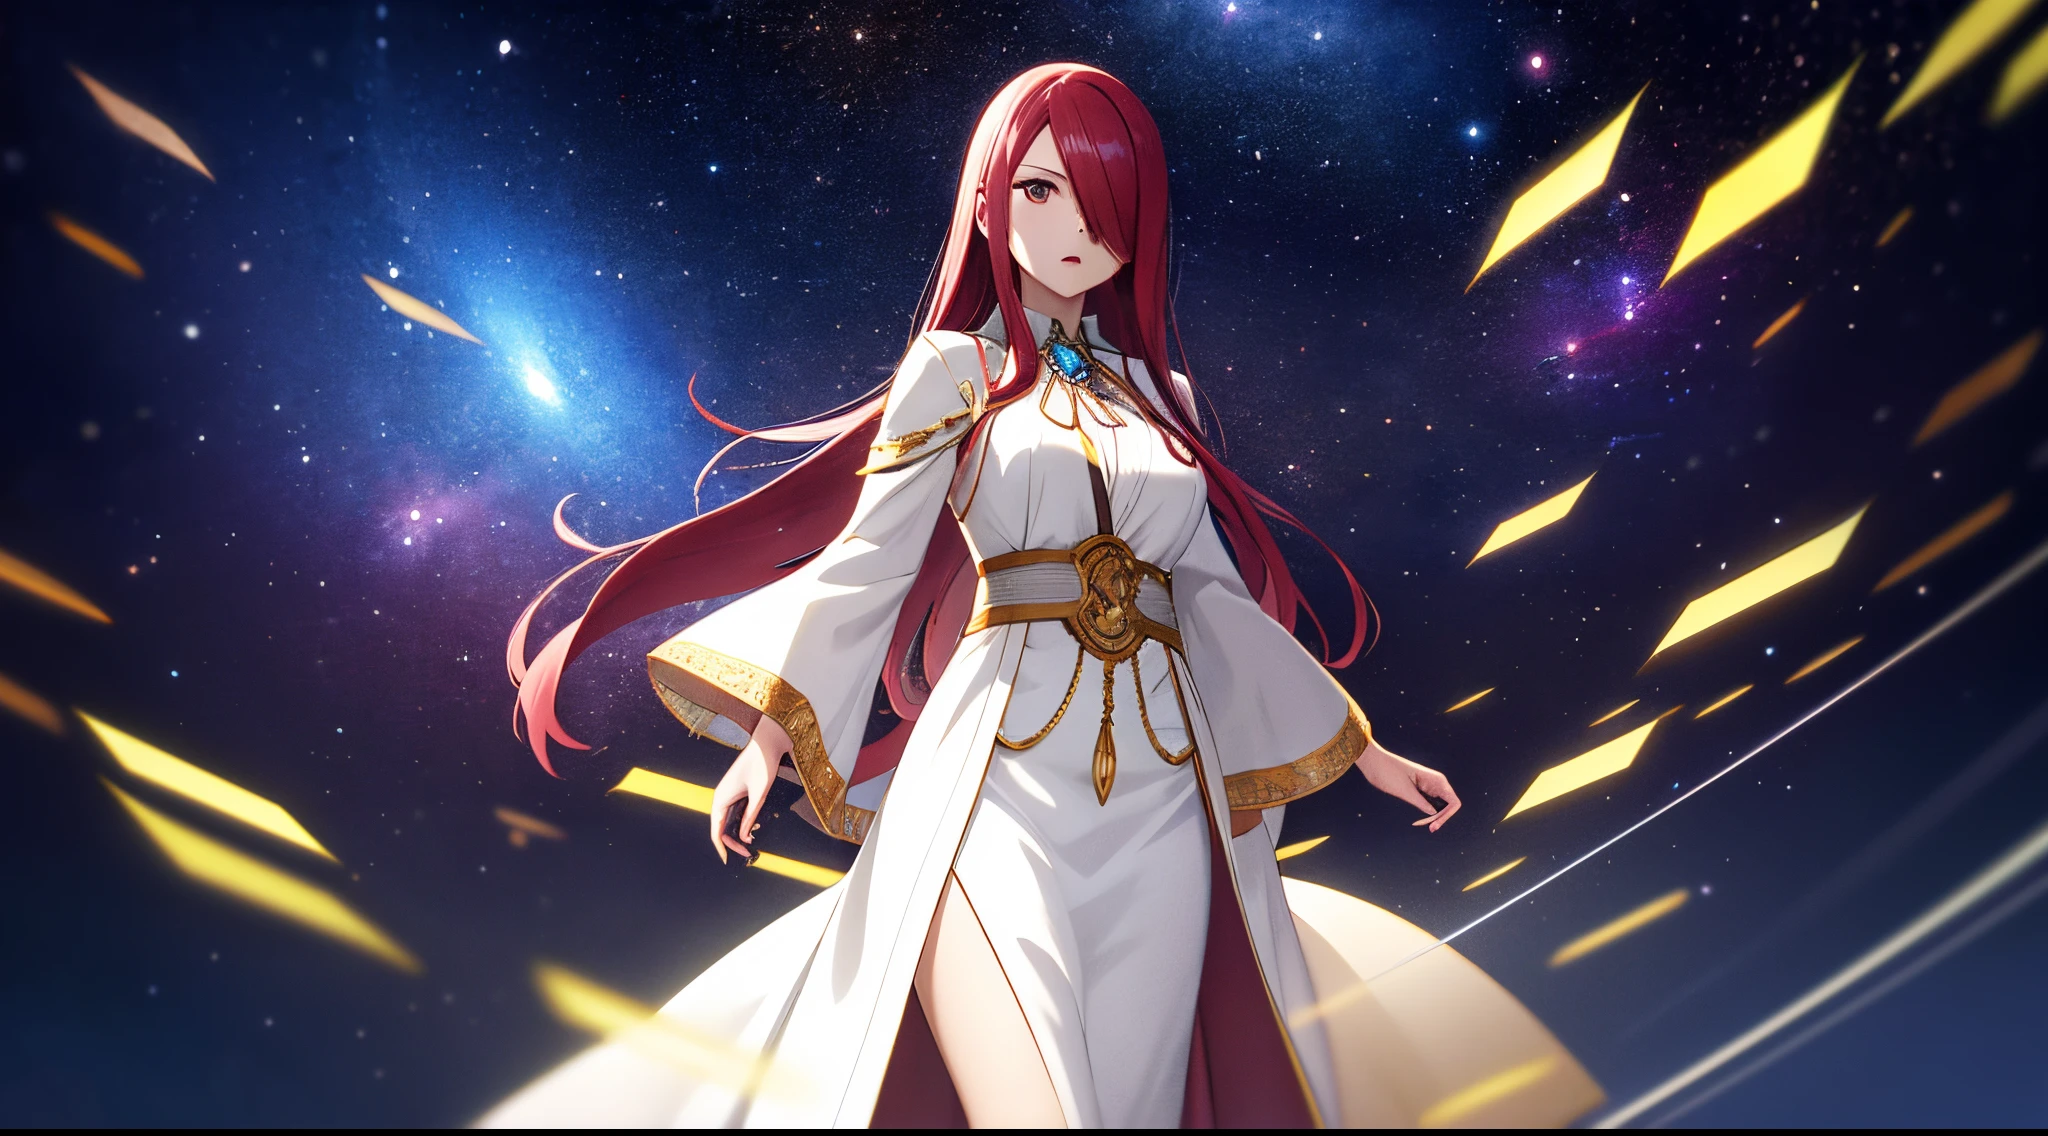 erza, 1girl, solo, long_hair, medium breasts,brown_eyes,red_hair,hair over one eye, standing, looking at viewer,ethereal white robe, praying beads on neck, long skirt,outer space galaxy and nebulae,anime style,deep depth of field,wide angle view,Lumen Reflections,Screen Space Reflections,Diffraction Grading,Chromatic Aberration,GB Displacement,Scan Lines,Ray Traced,Anti-Aliasing,FXAA,TXAA,RTX,SSAO,Shaders,OpenGL-Shaders,GLSL-Shaders,Post Processing,Post-Production,cell Shading,Tone Mapping,CGI,VFX,SFX,insanely detailed and intricate, 4K